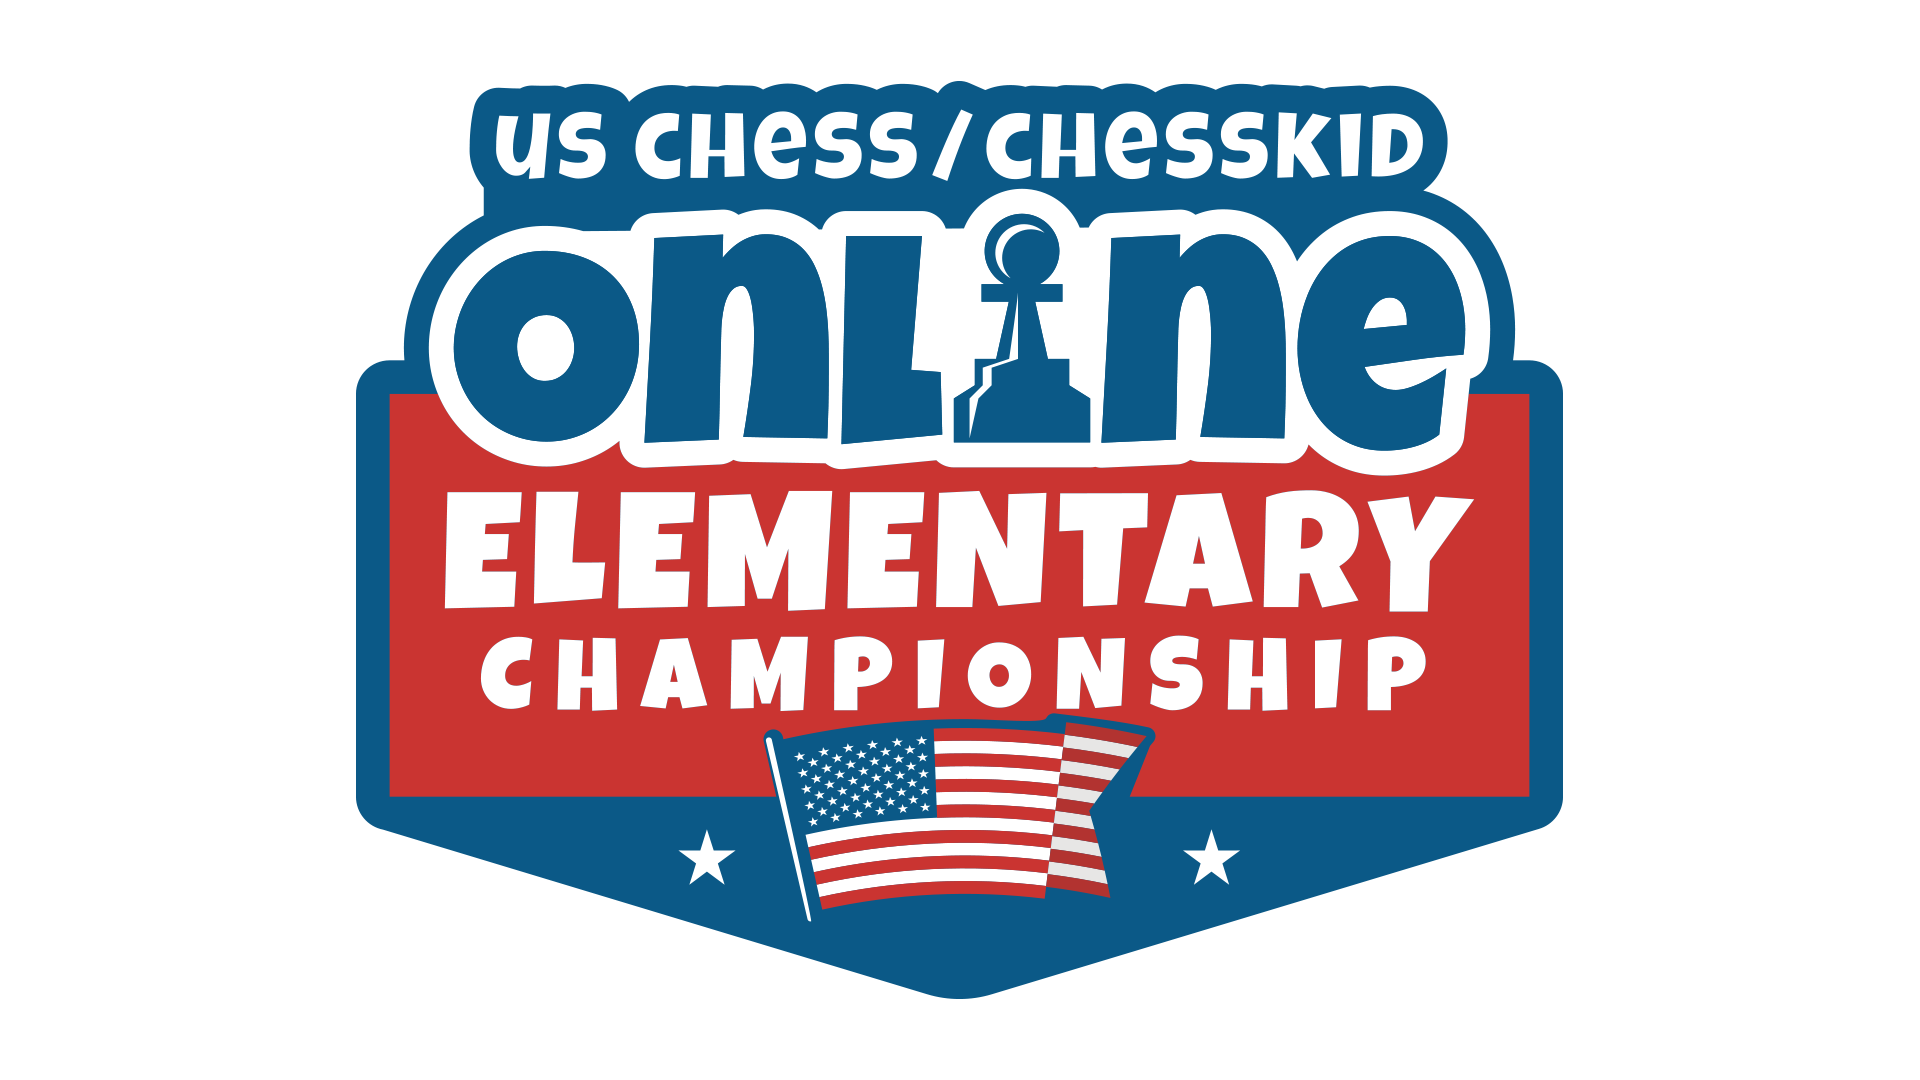 2020 ChessKid Youth Speed Chess Championship Matchups, Results 